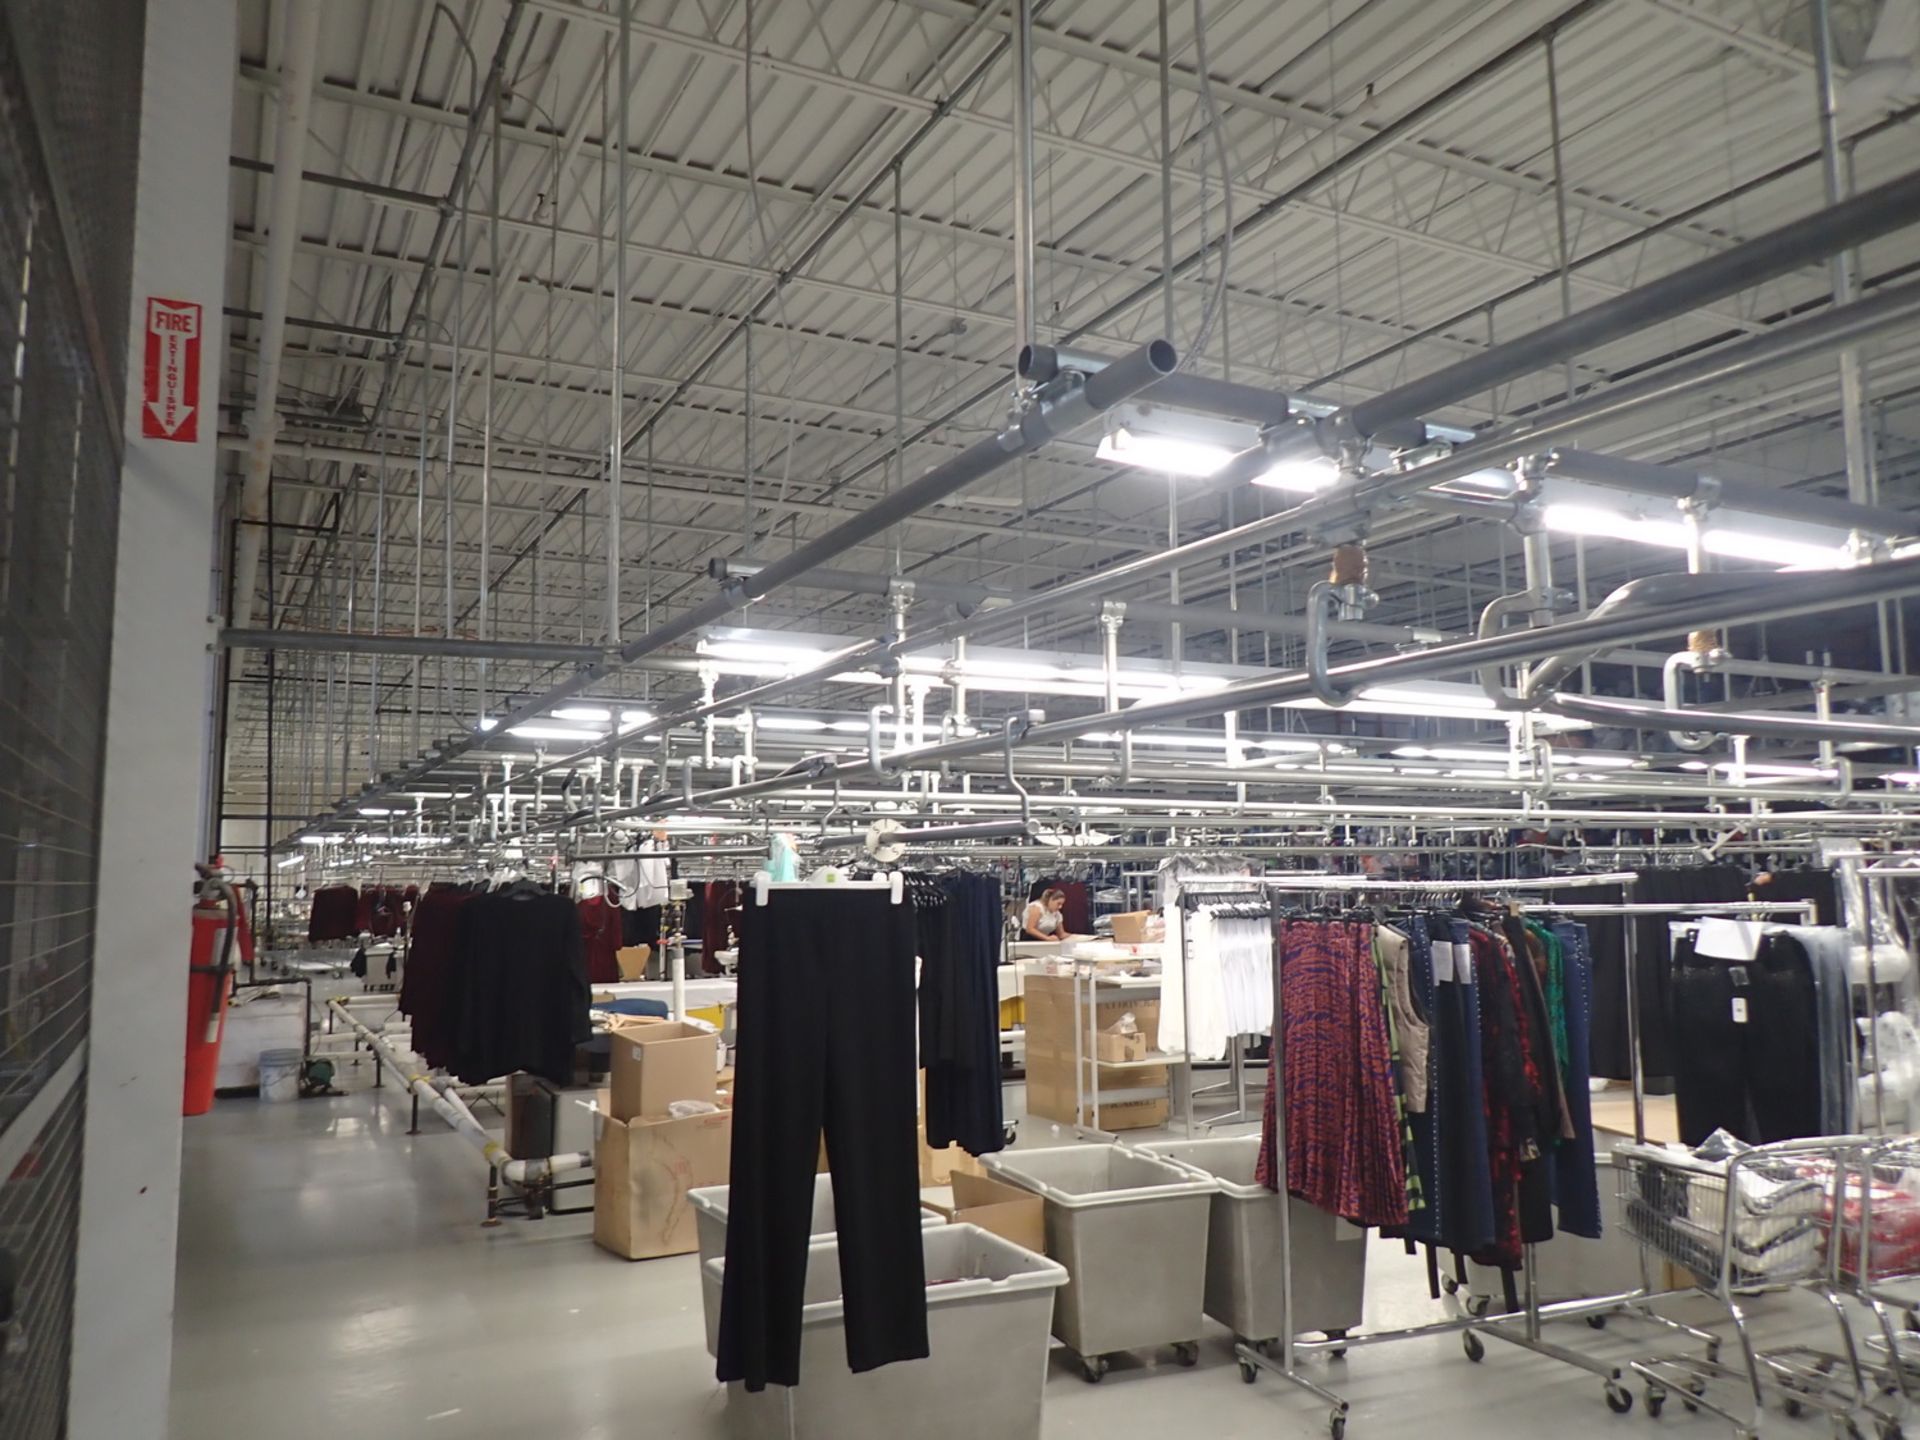 LOT - STEEL PIPE OVERHEAD STORAGE SYSTEM W/ TRAVEL HANGERS (APPROX. 1500') - Image 4 of 11